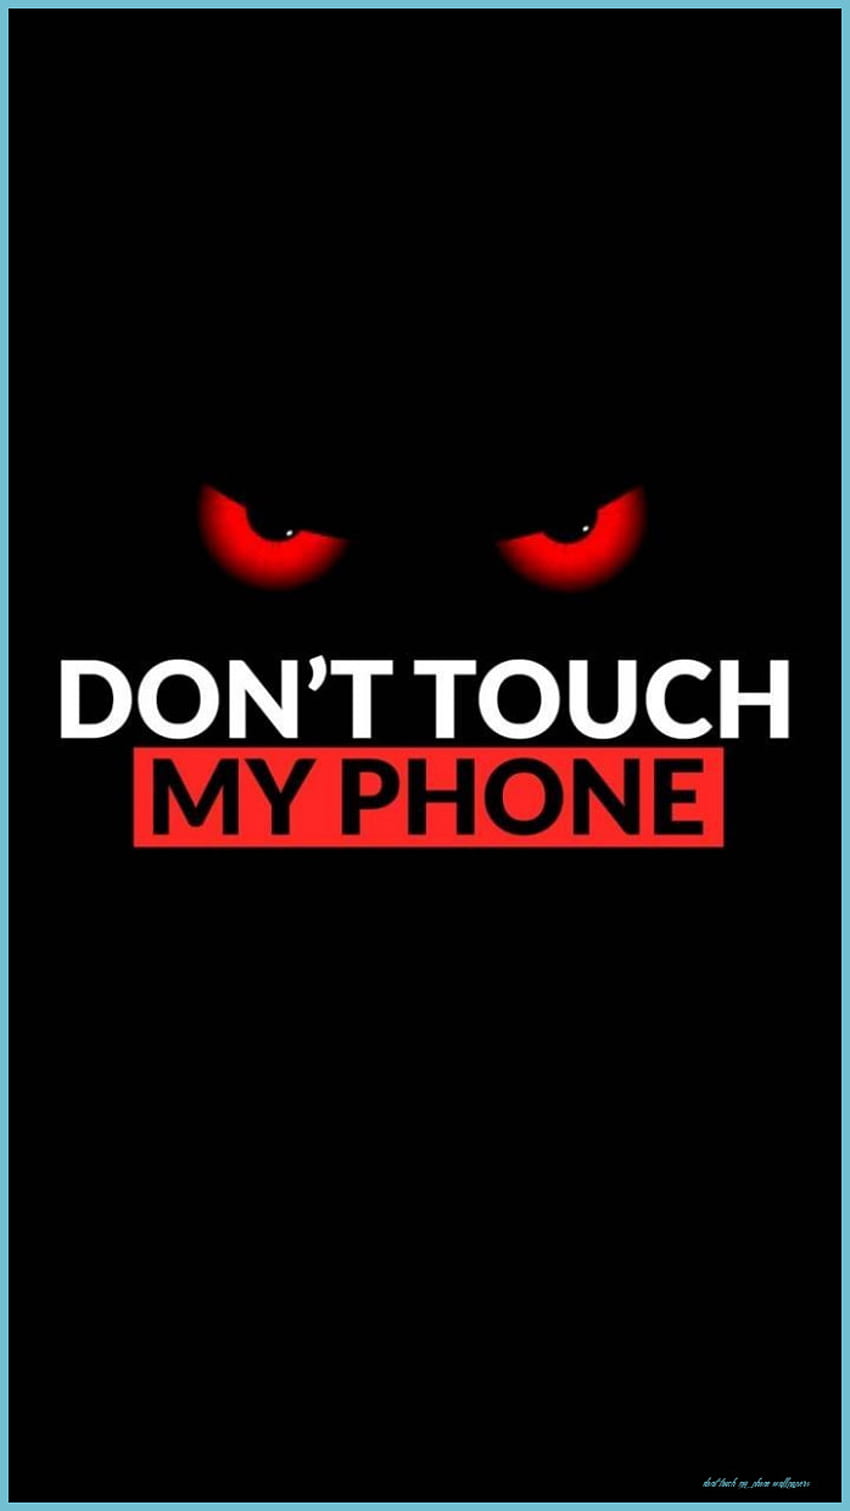 9) Don't Touch My Phone의 멋진 9K Don't Touch My - Don't Touch My Phone, Don't Touch Her Phone HD 전화 배경 화면